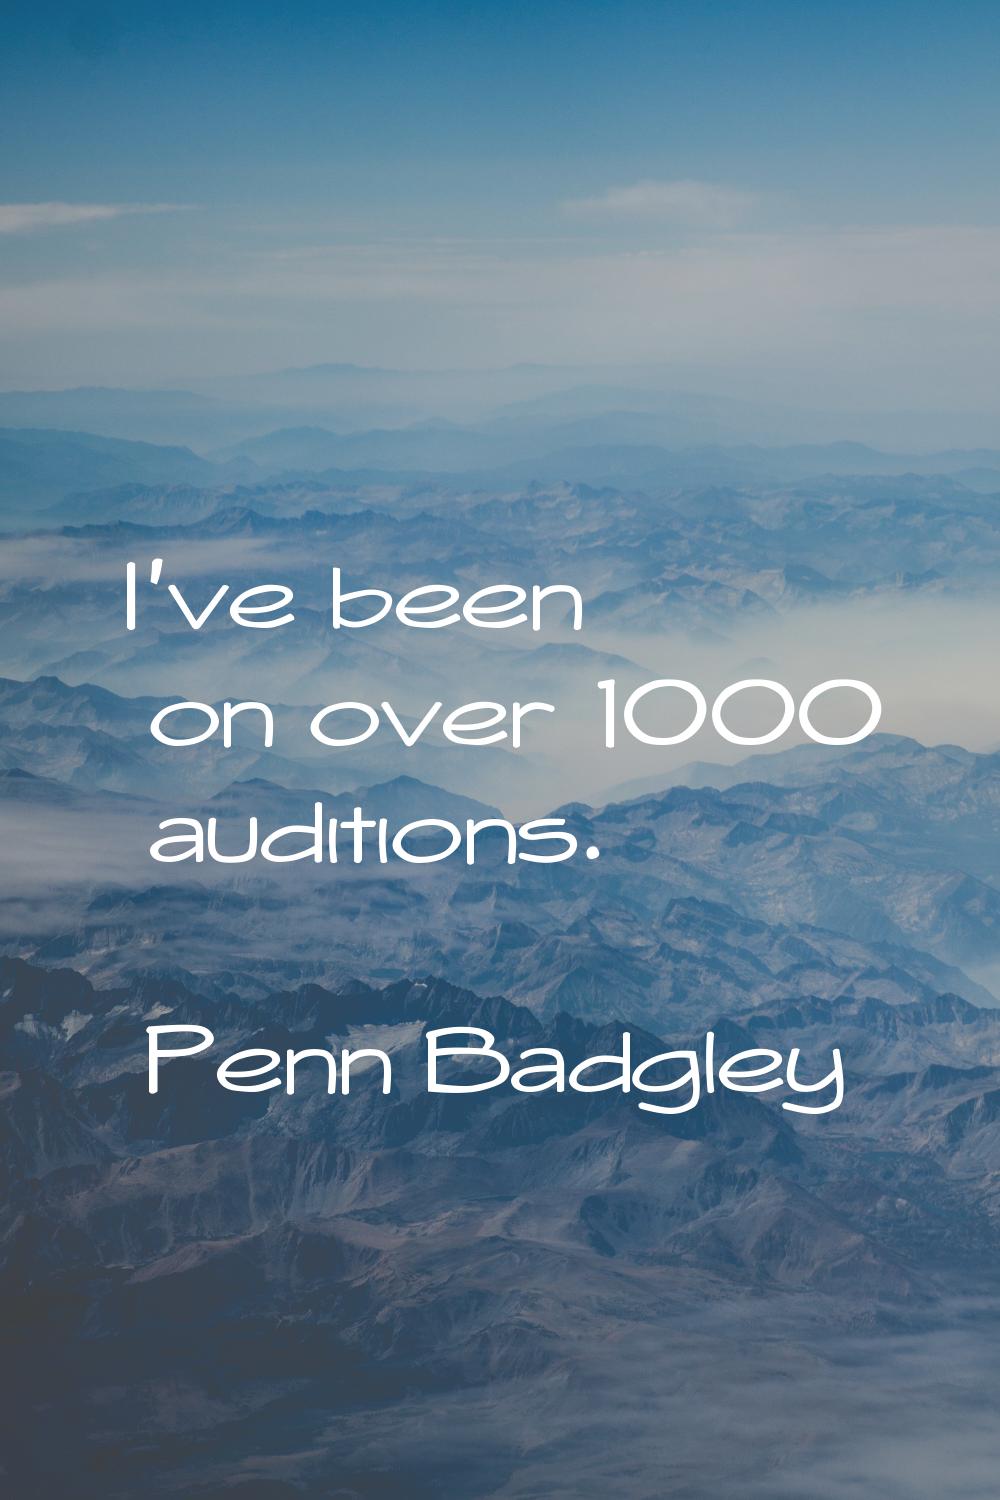 I've been on over 1000 auditions.